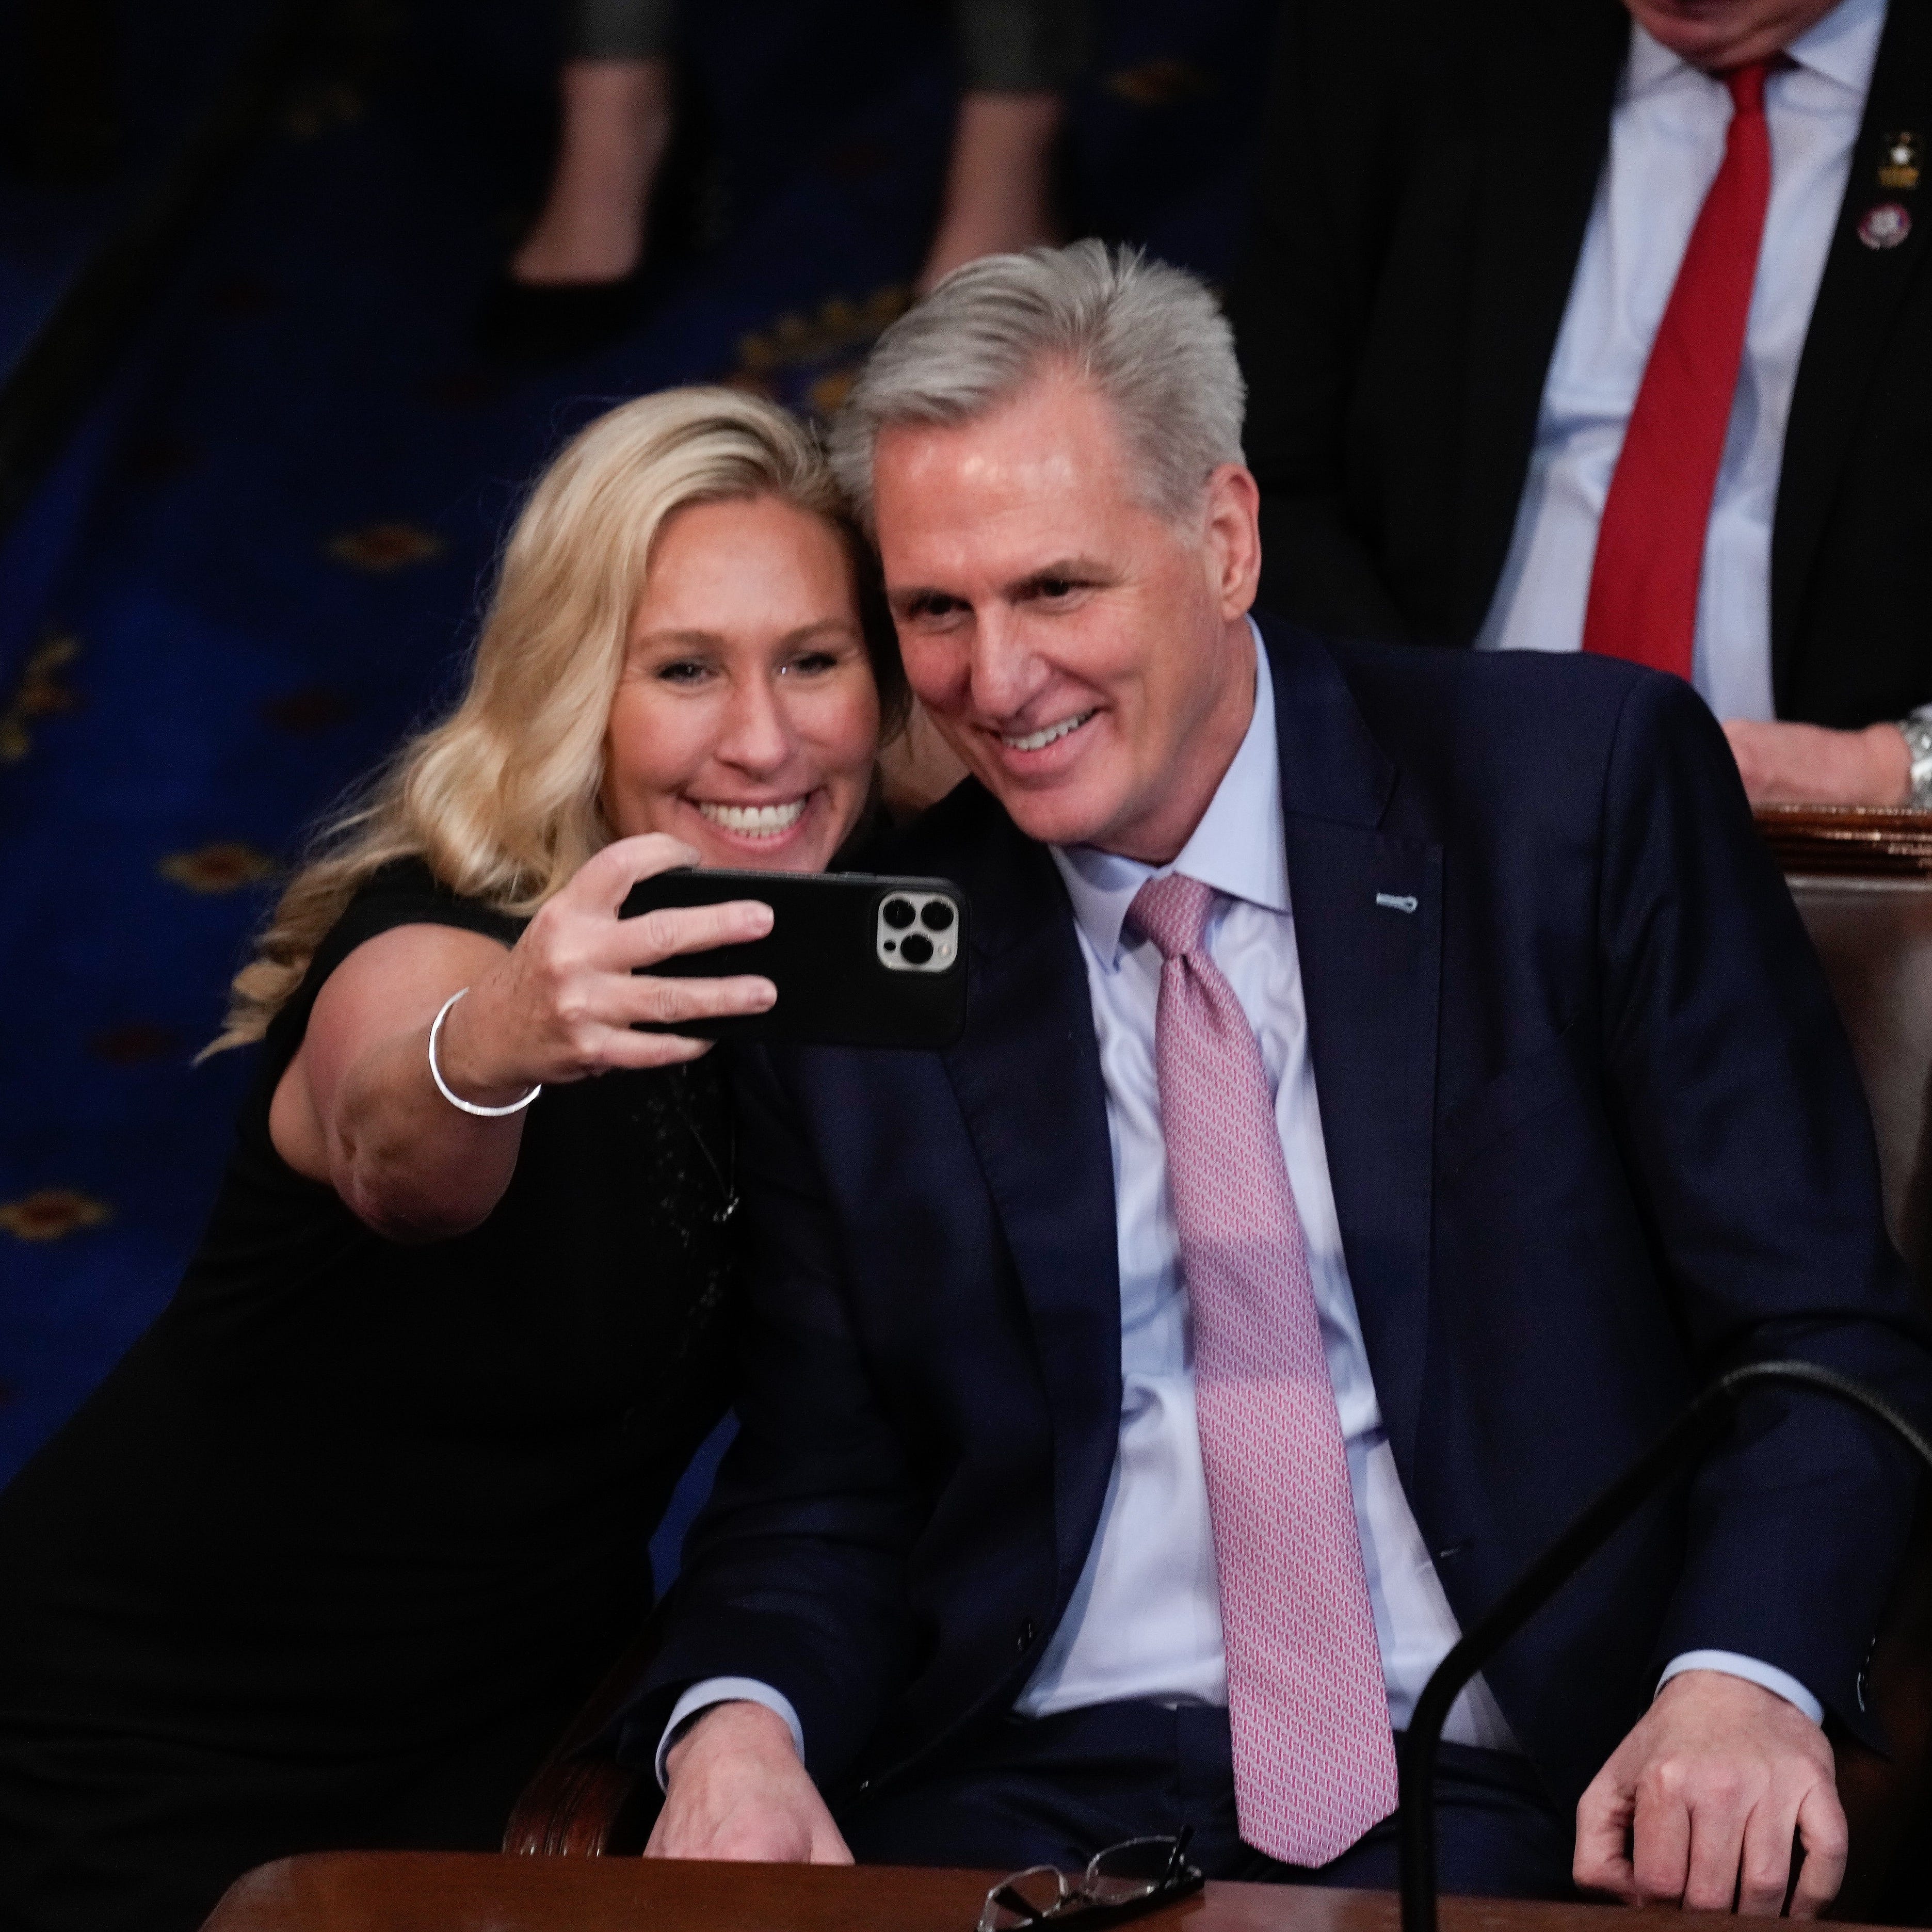 Rep. Marjorie Taylor Greene, R-Ga., takes a selfie with the newly elected House Speaker Kevin McCarthy on Jan. 6, 2023.